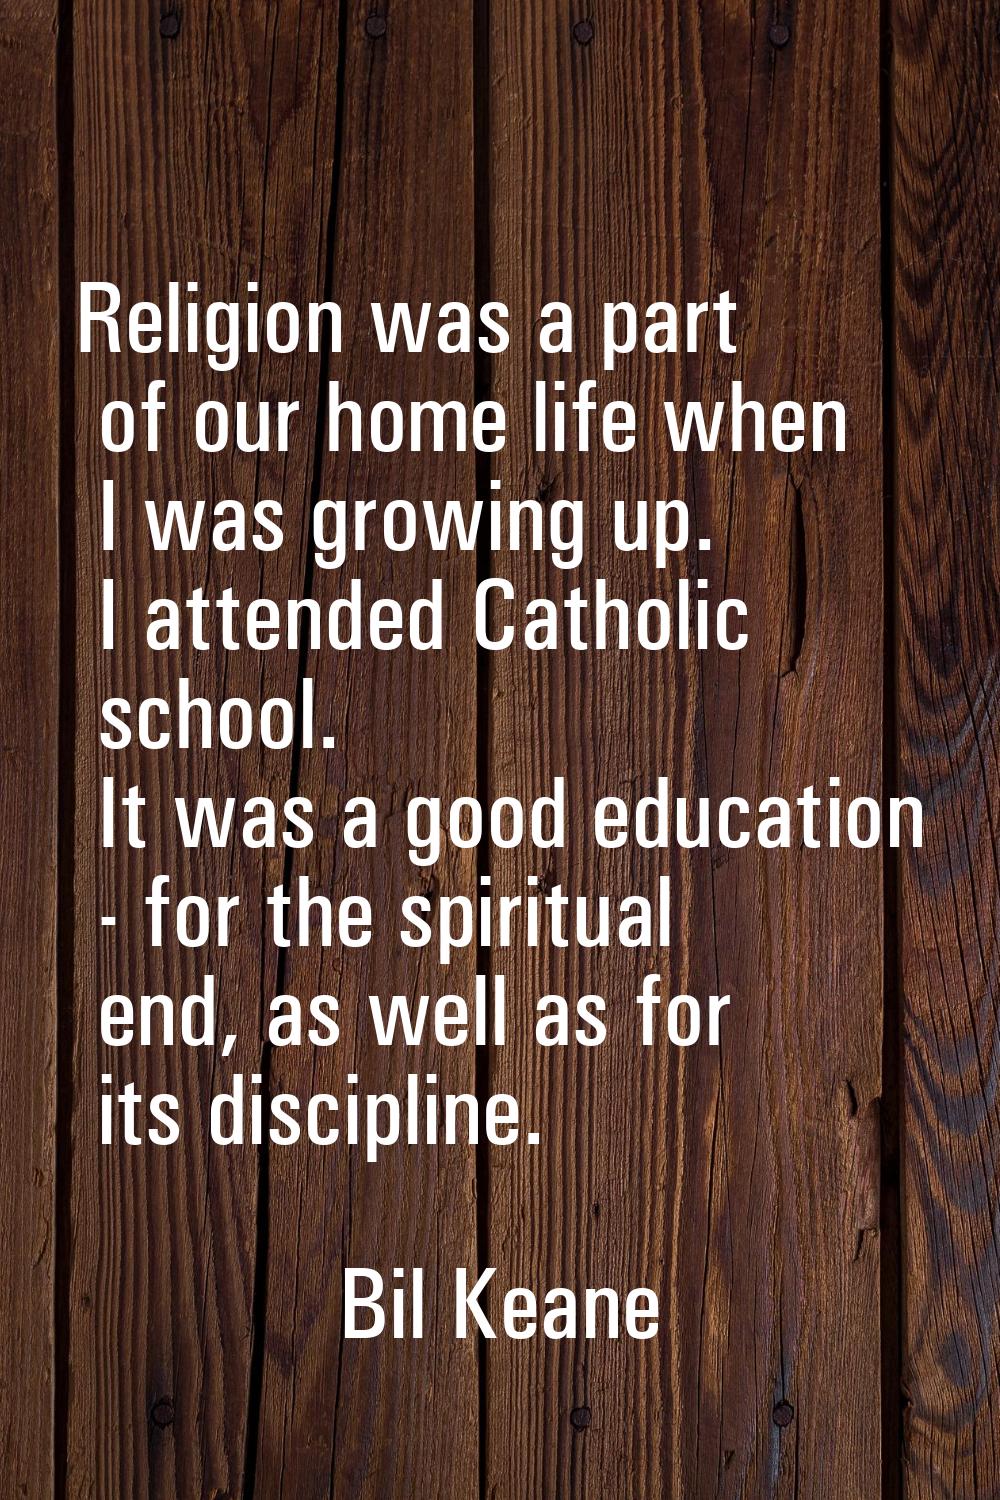 Religion was a part of our home life when I was growing up. I attended Catholic school. It was a go